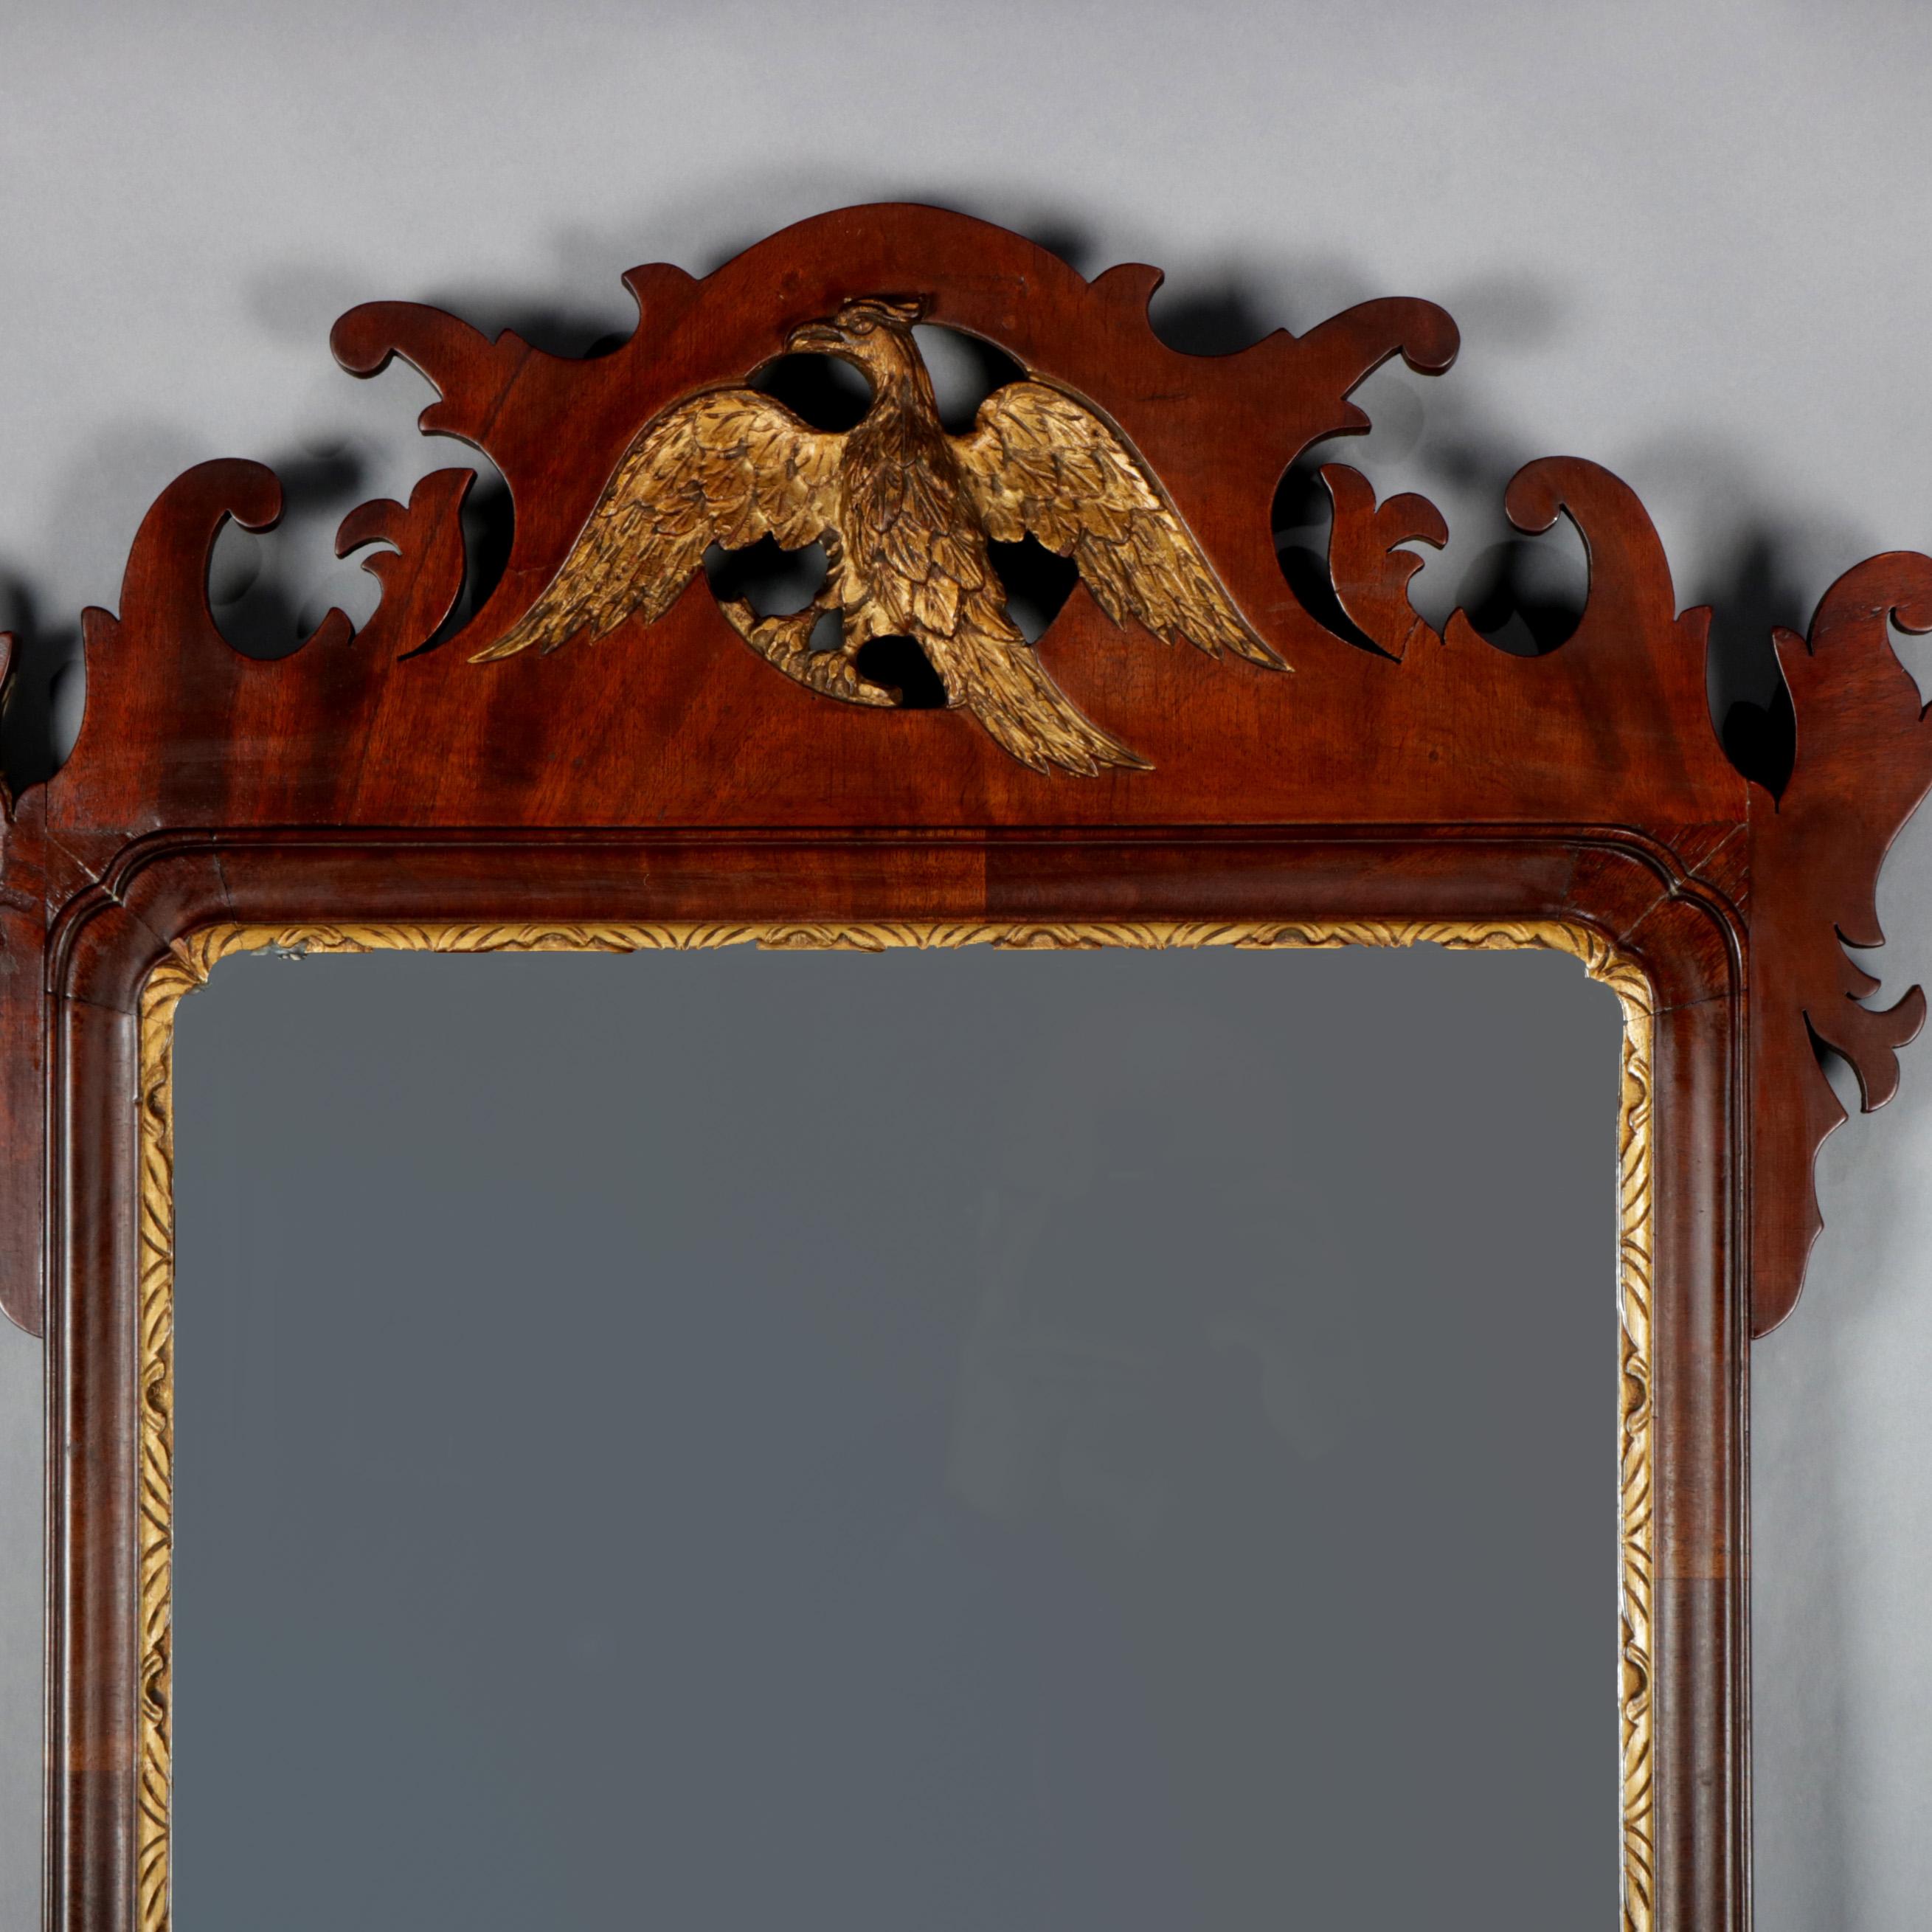 An antique Federal Chippendale wall mirror features cutout scroll form mahogany frame with pierced crest having central spread-eagle gilt phoenix and mirror plate bordered with carved foliate and gilt trim, circa 1800.

Measures: 41.5